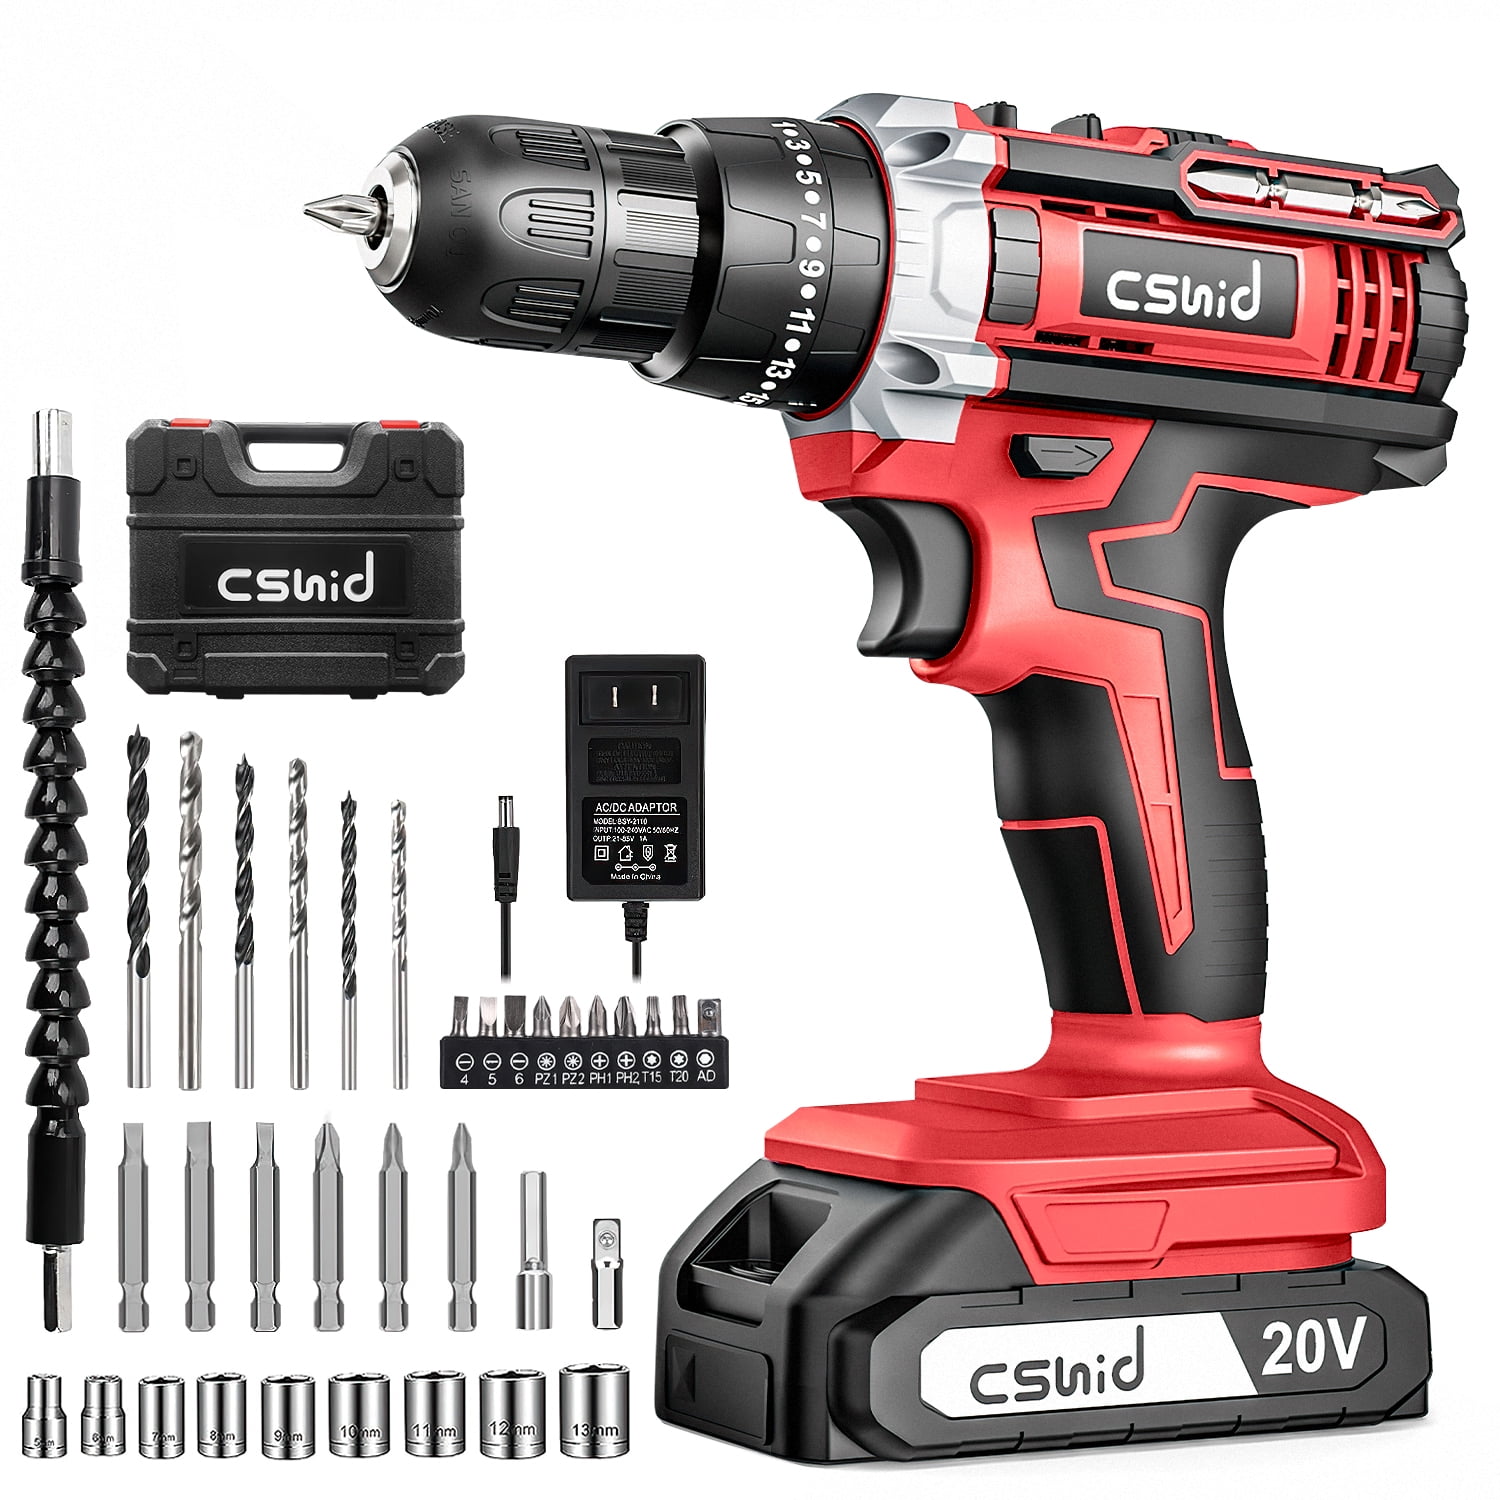 Mini Drill 12V 32N.m 2-Speed Electric Lithium-Ion Battery Cordless Drill